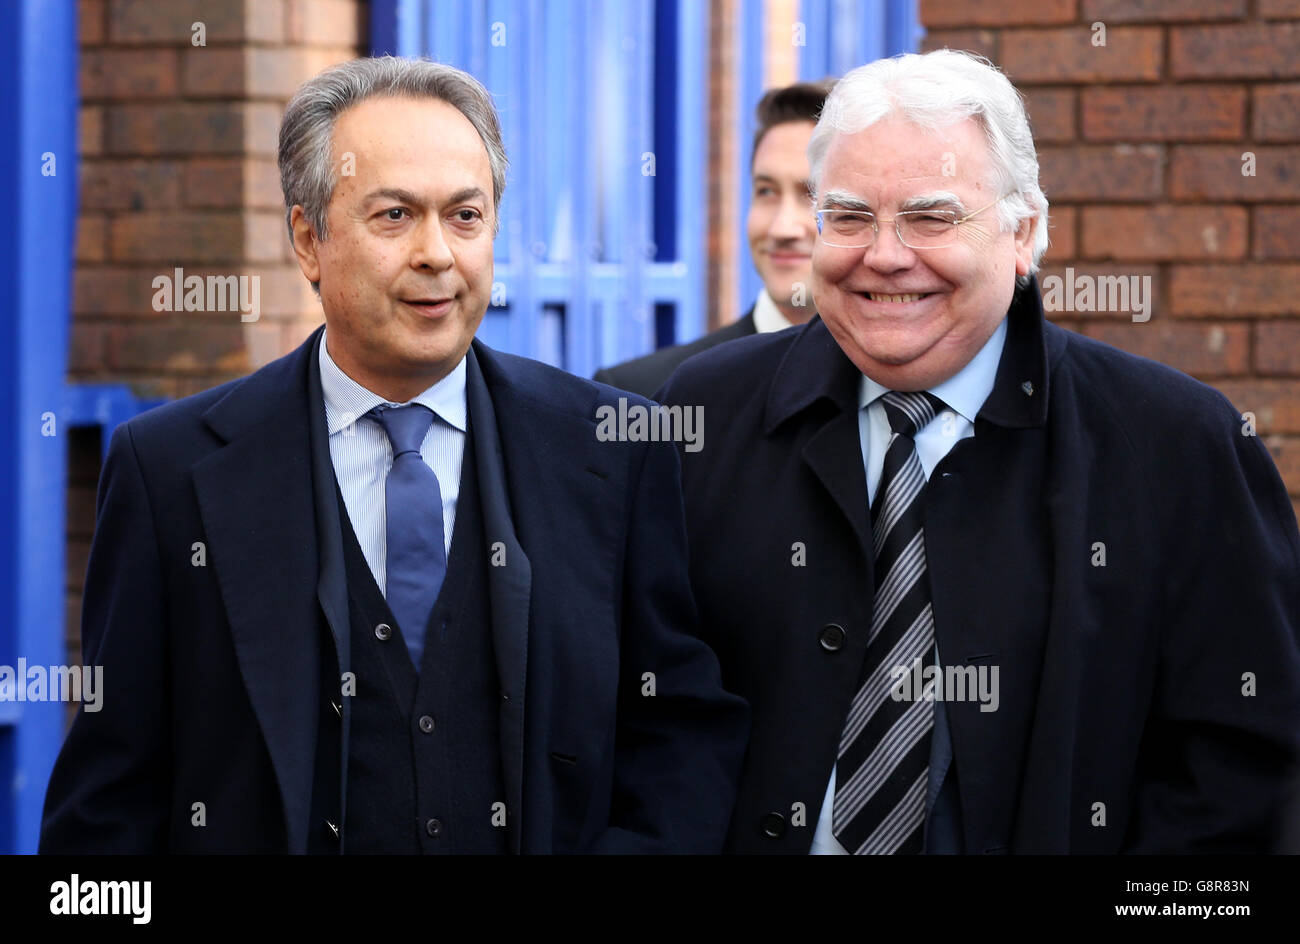 New Everton owner Farhad Moshiri (left) with Bill Kenwright (right) before the Emirates FA Cup, Quarter Final match at Goodison Park, Liverpool. Stock Photo